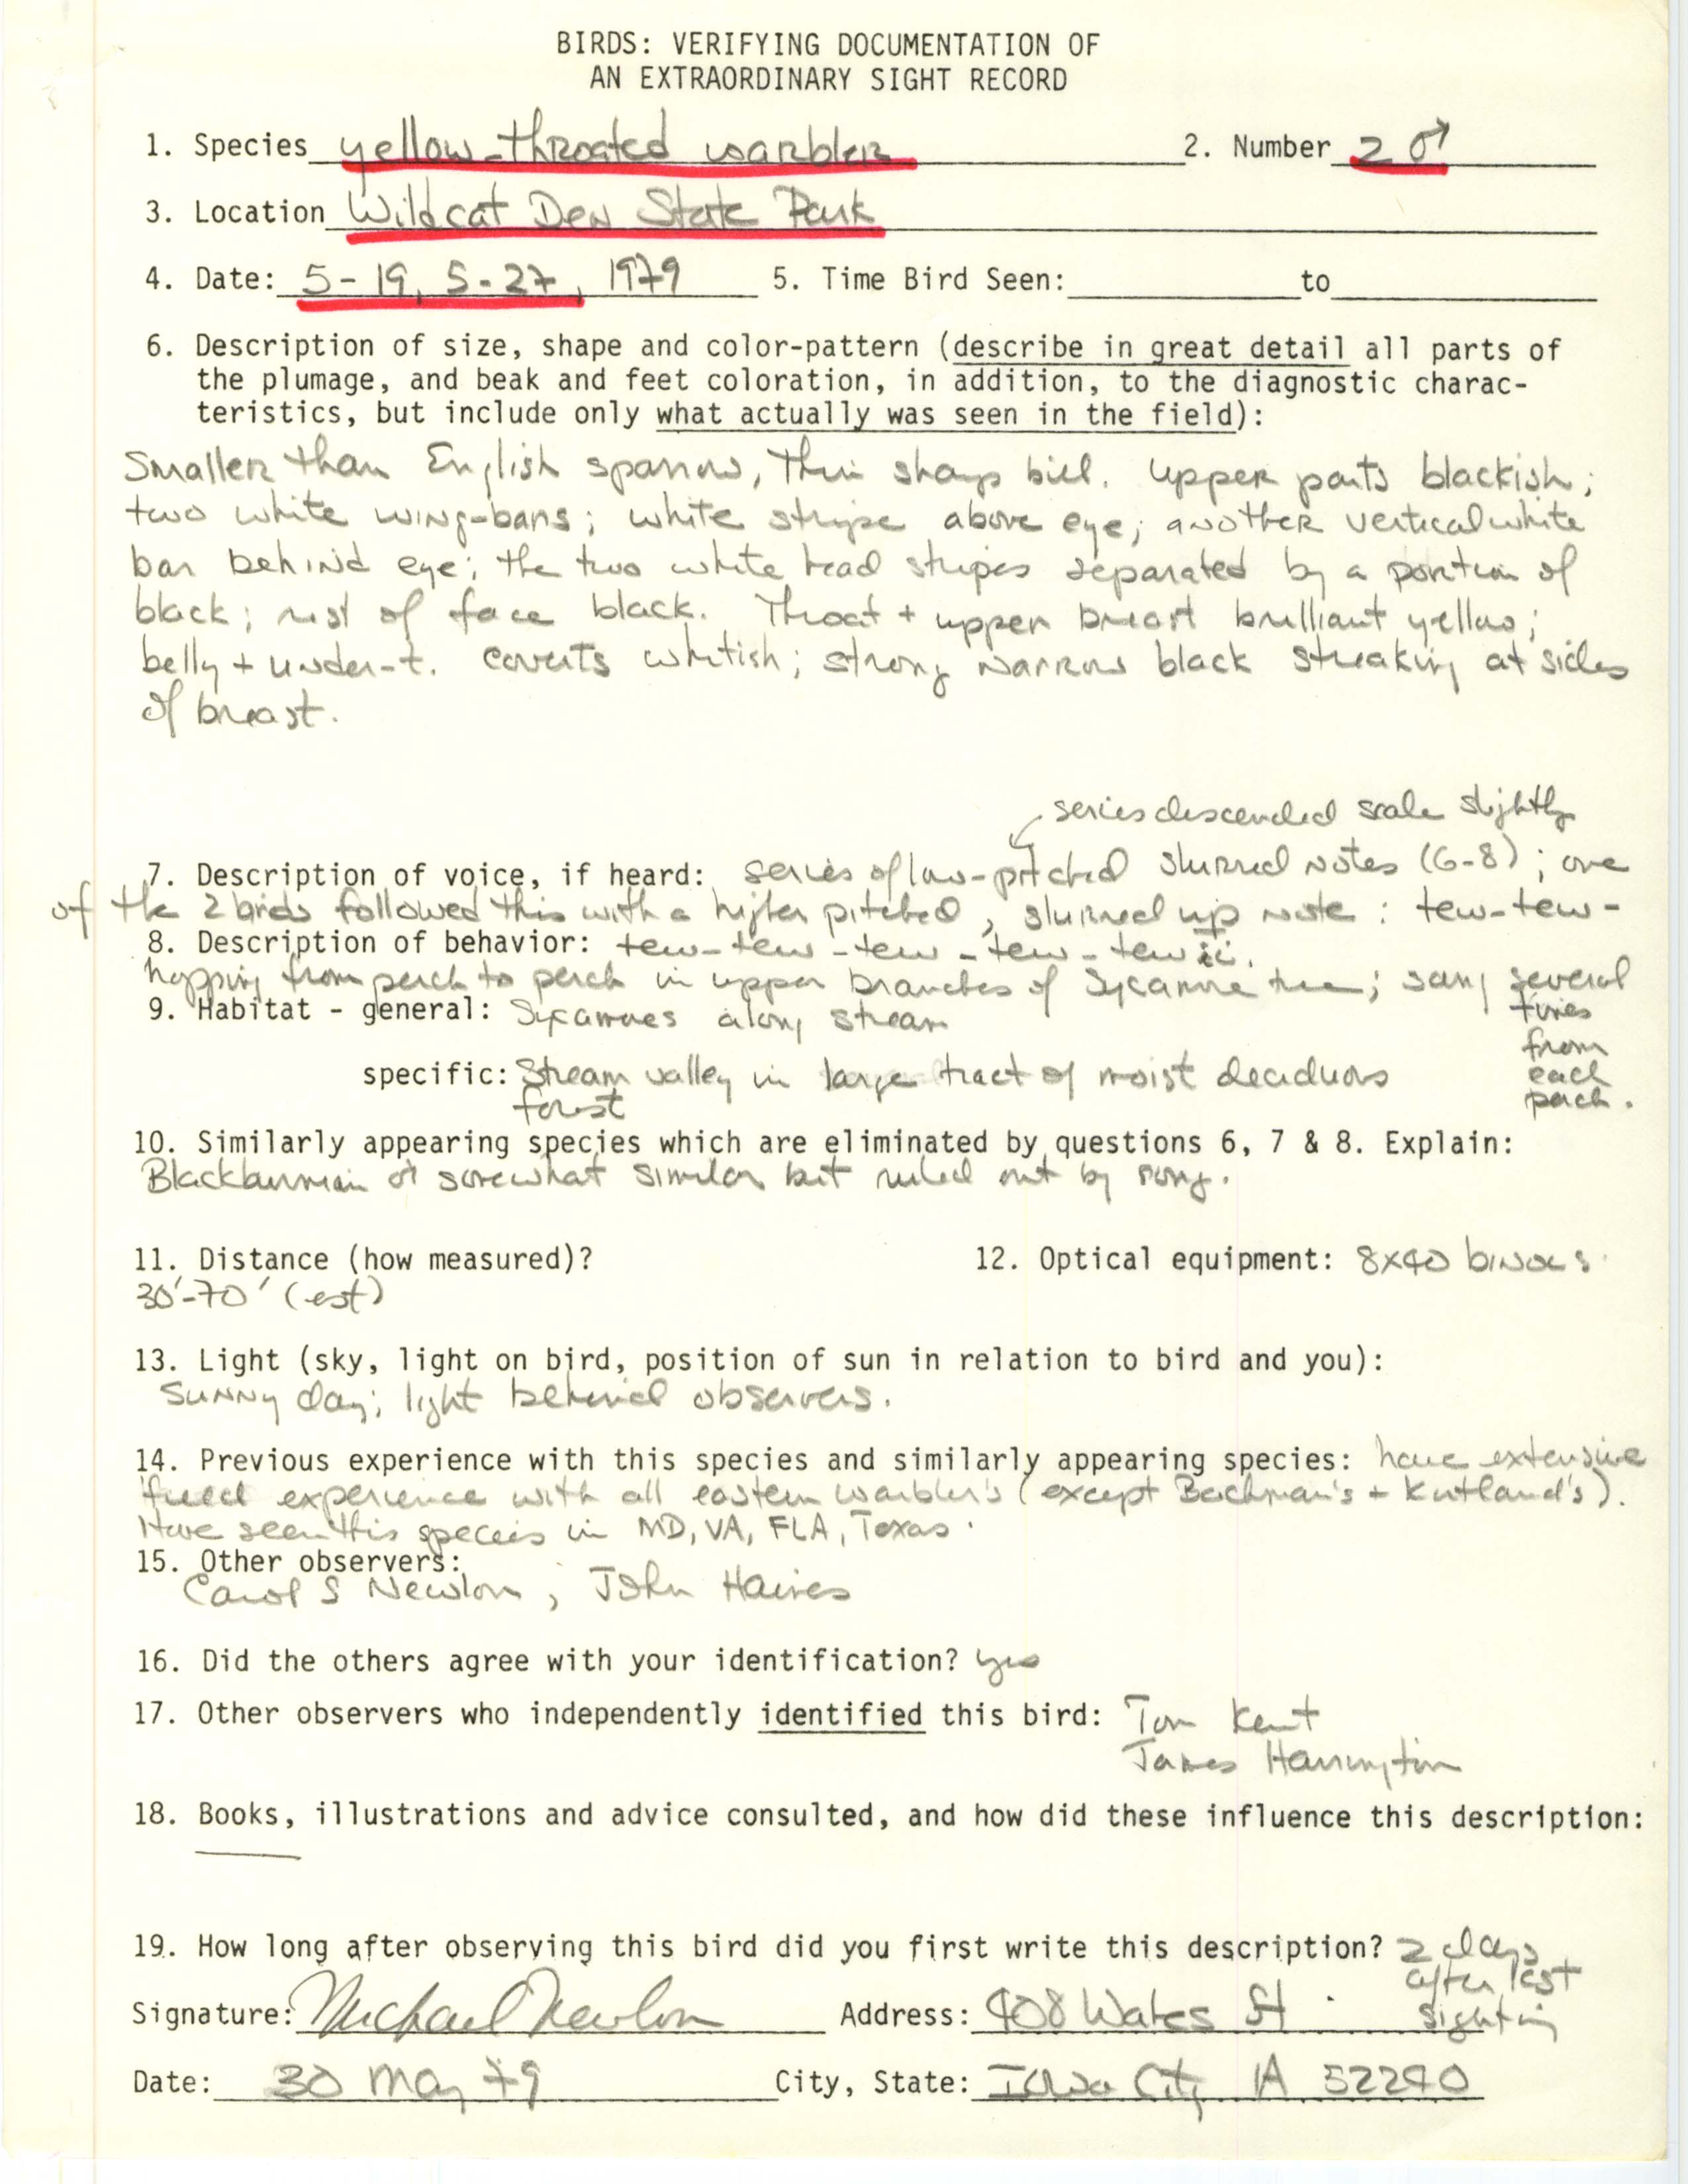 Rare bird documentation form for Yellow-throated Warbler at Wildcat Den State Park in 1979